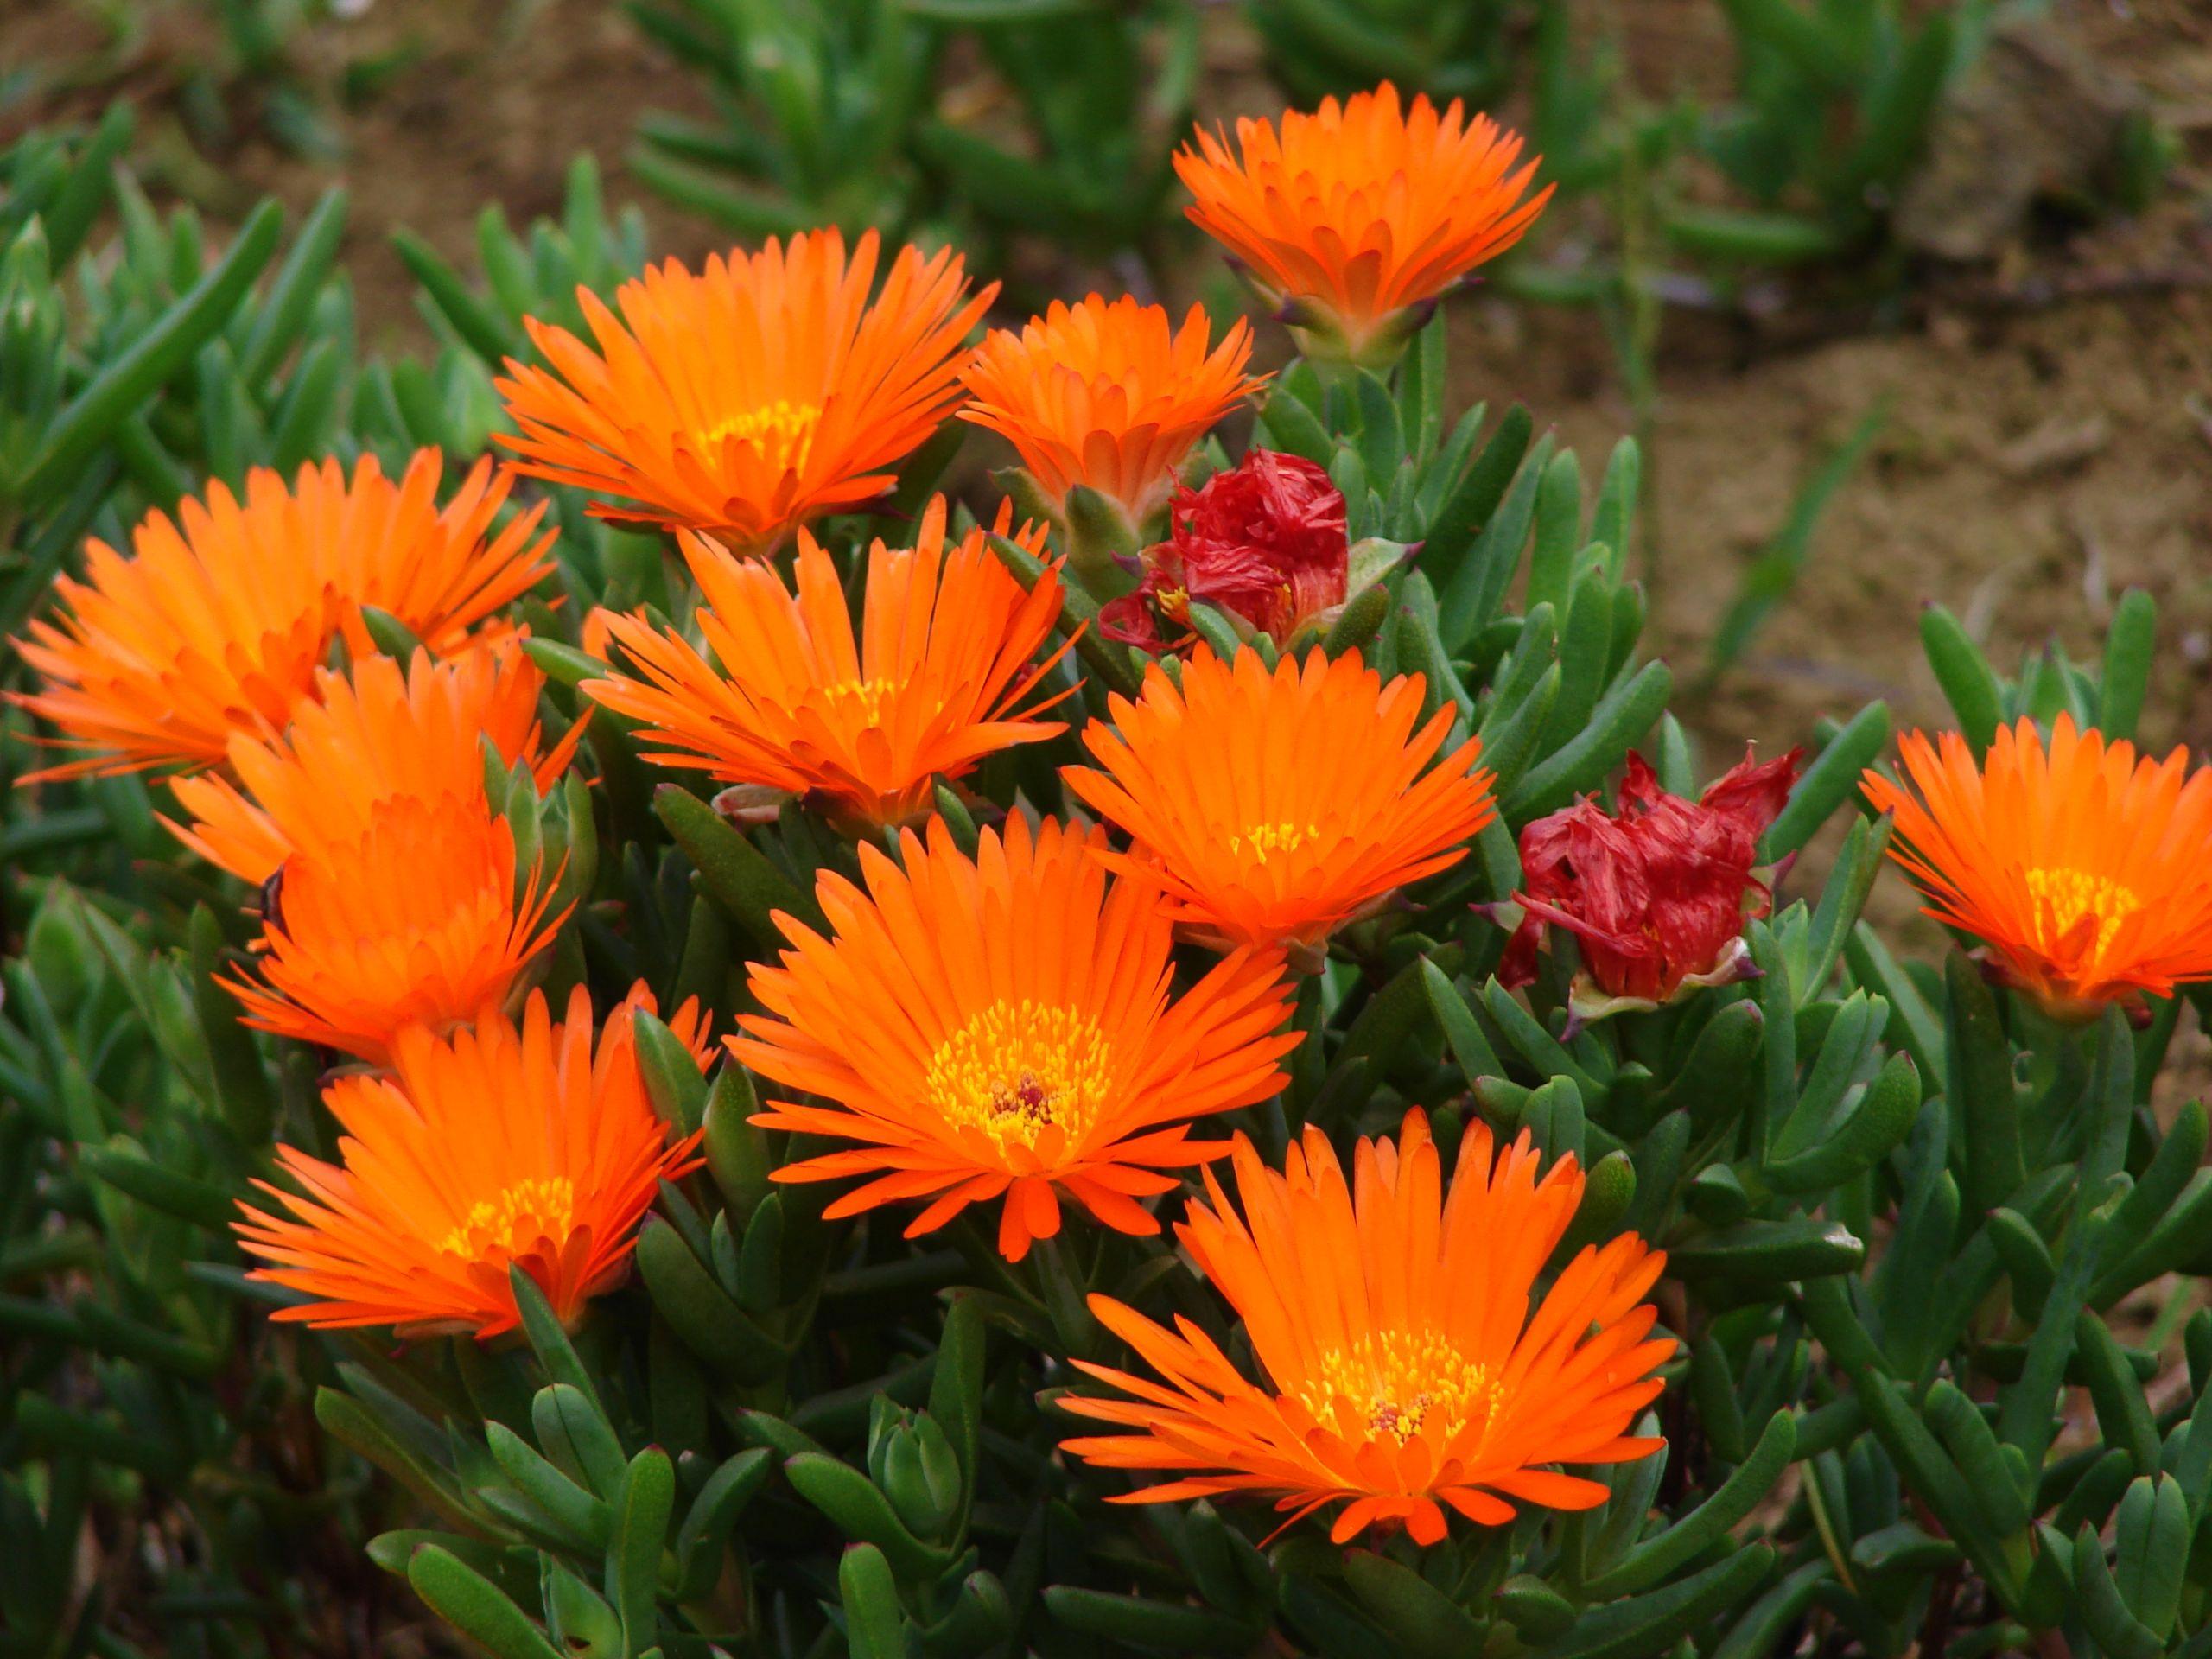 orange-red flowers with yellow center, green leaves and stems